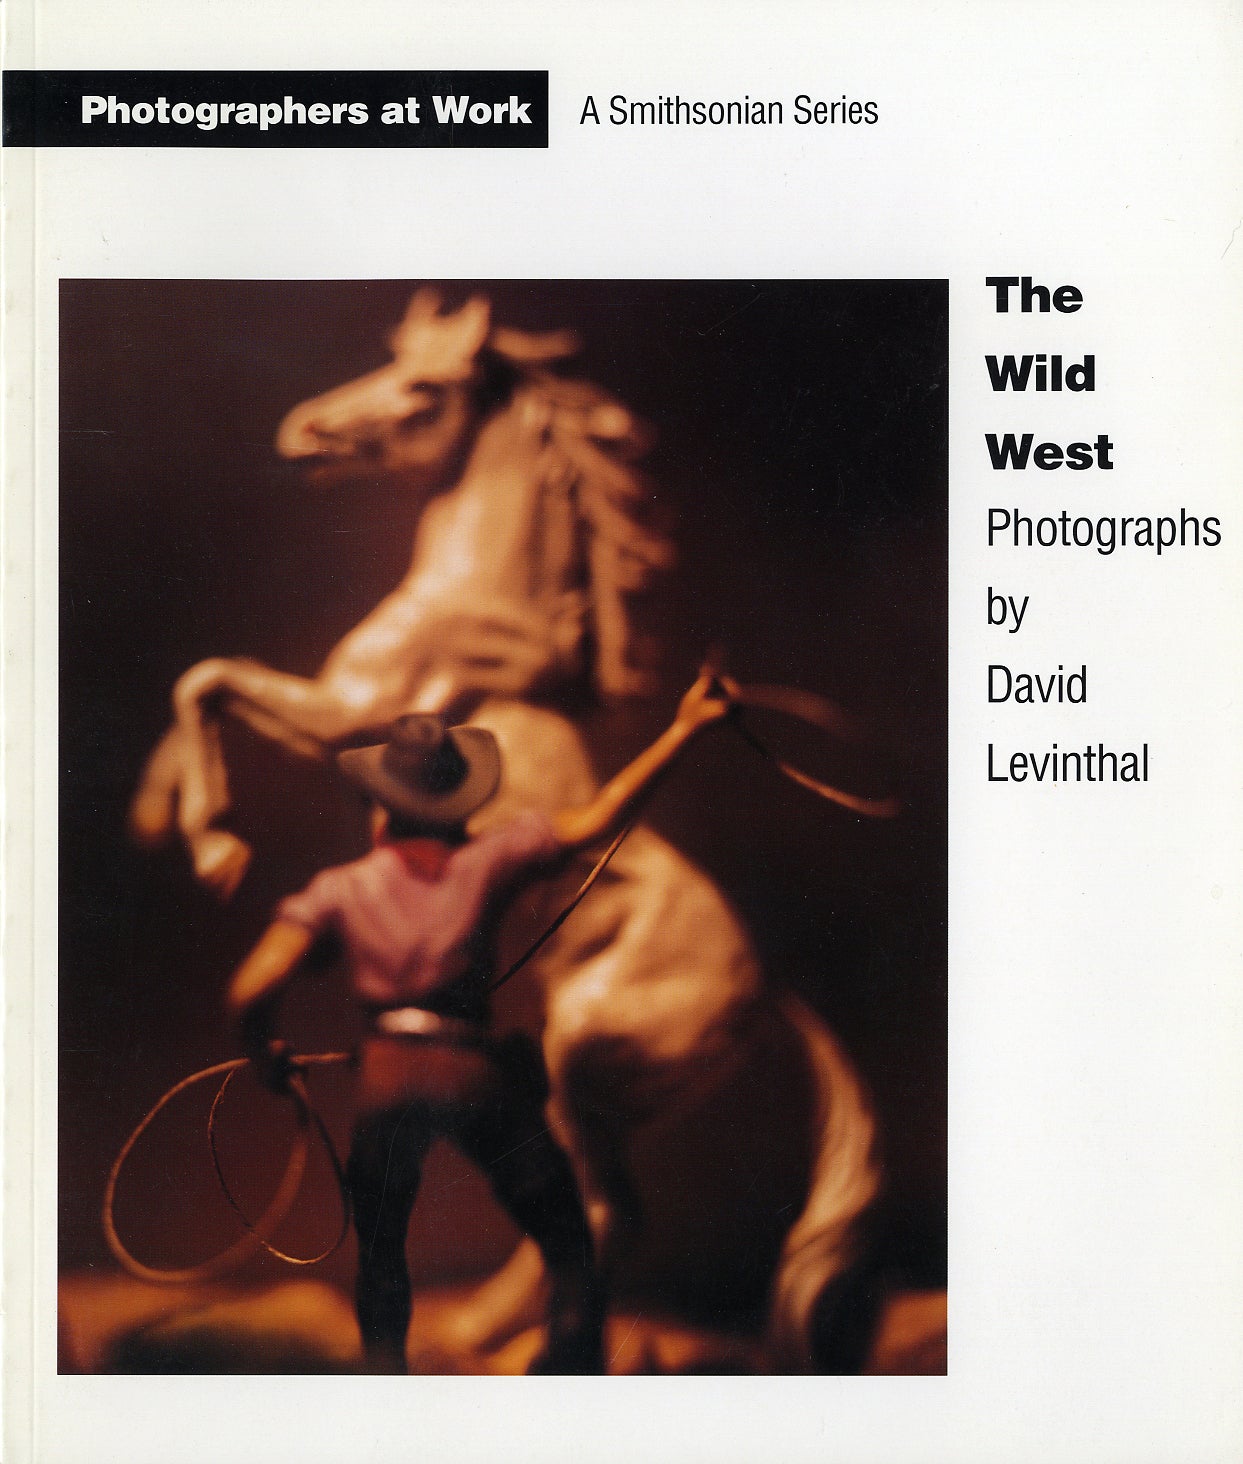 The Wild West: Photographs by David Levinthal (Photographers at Work Series)